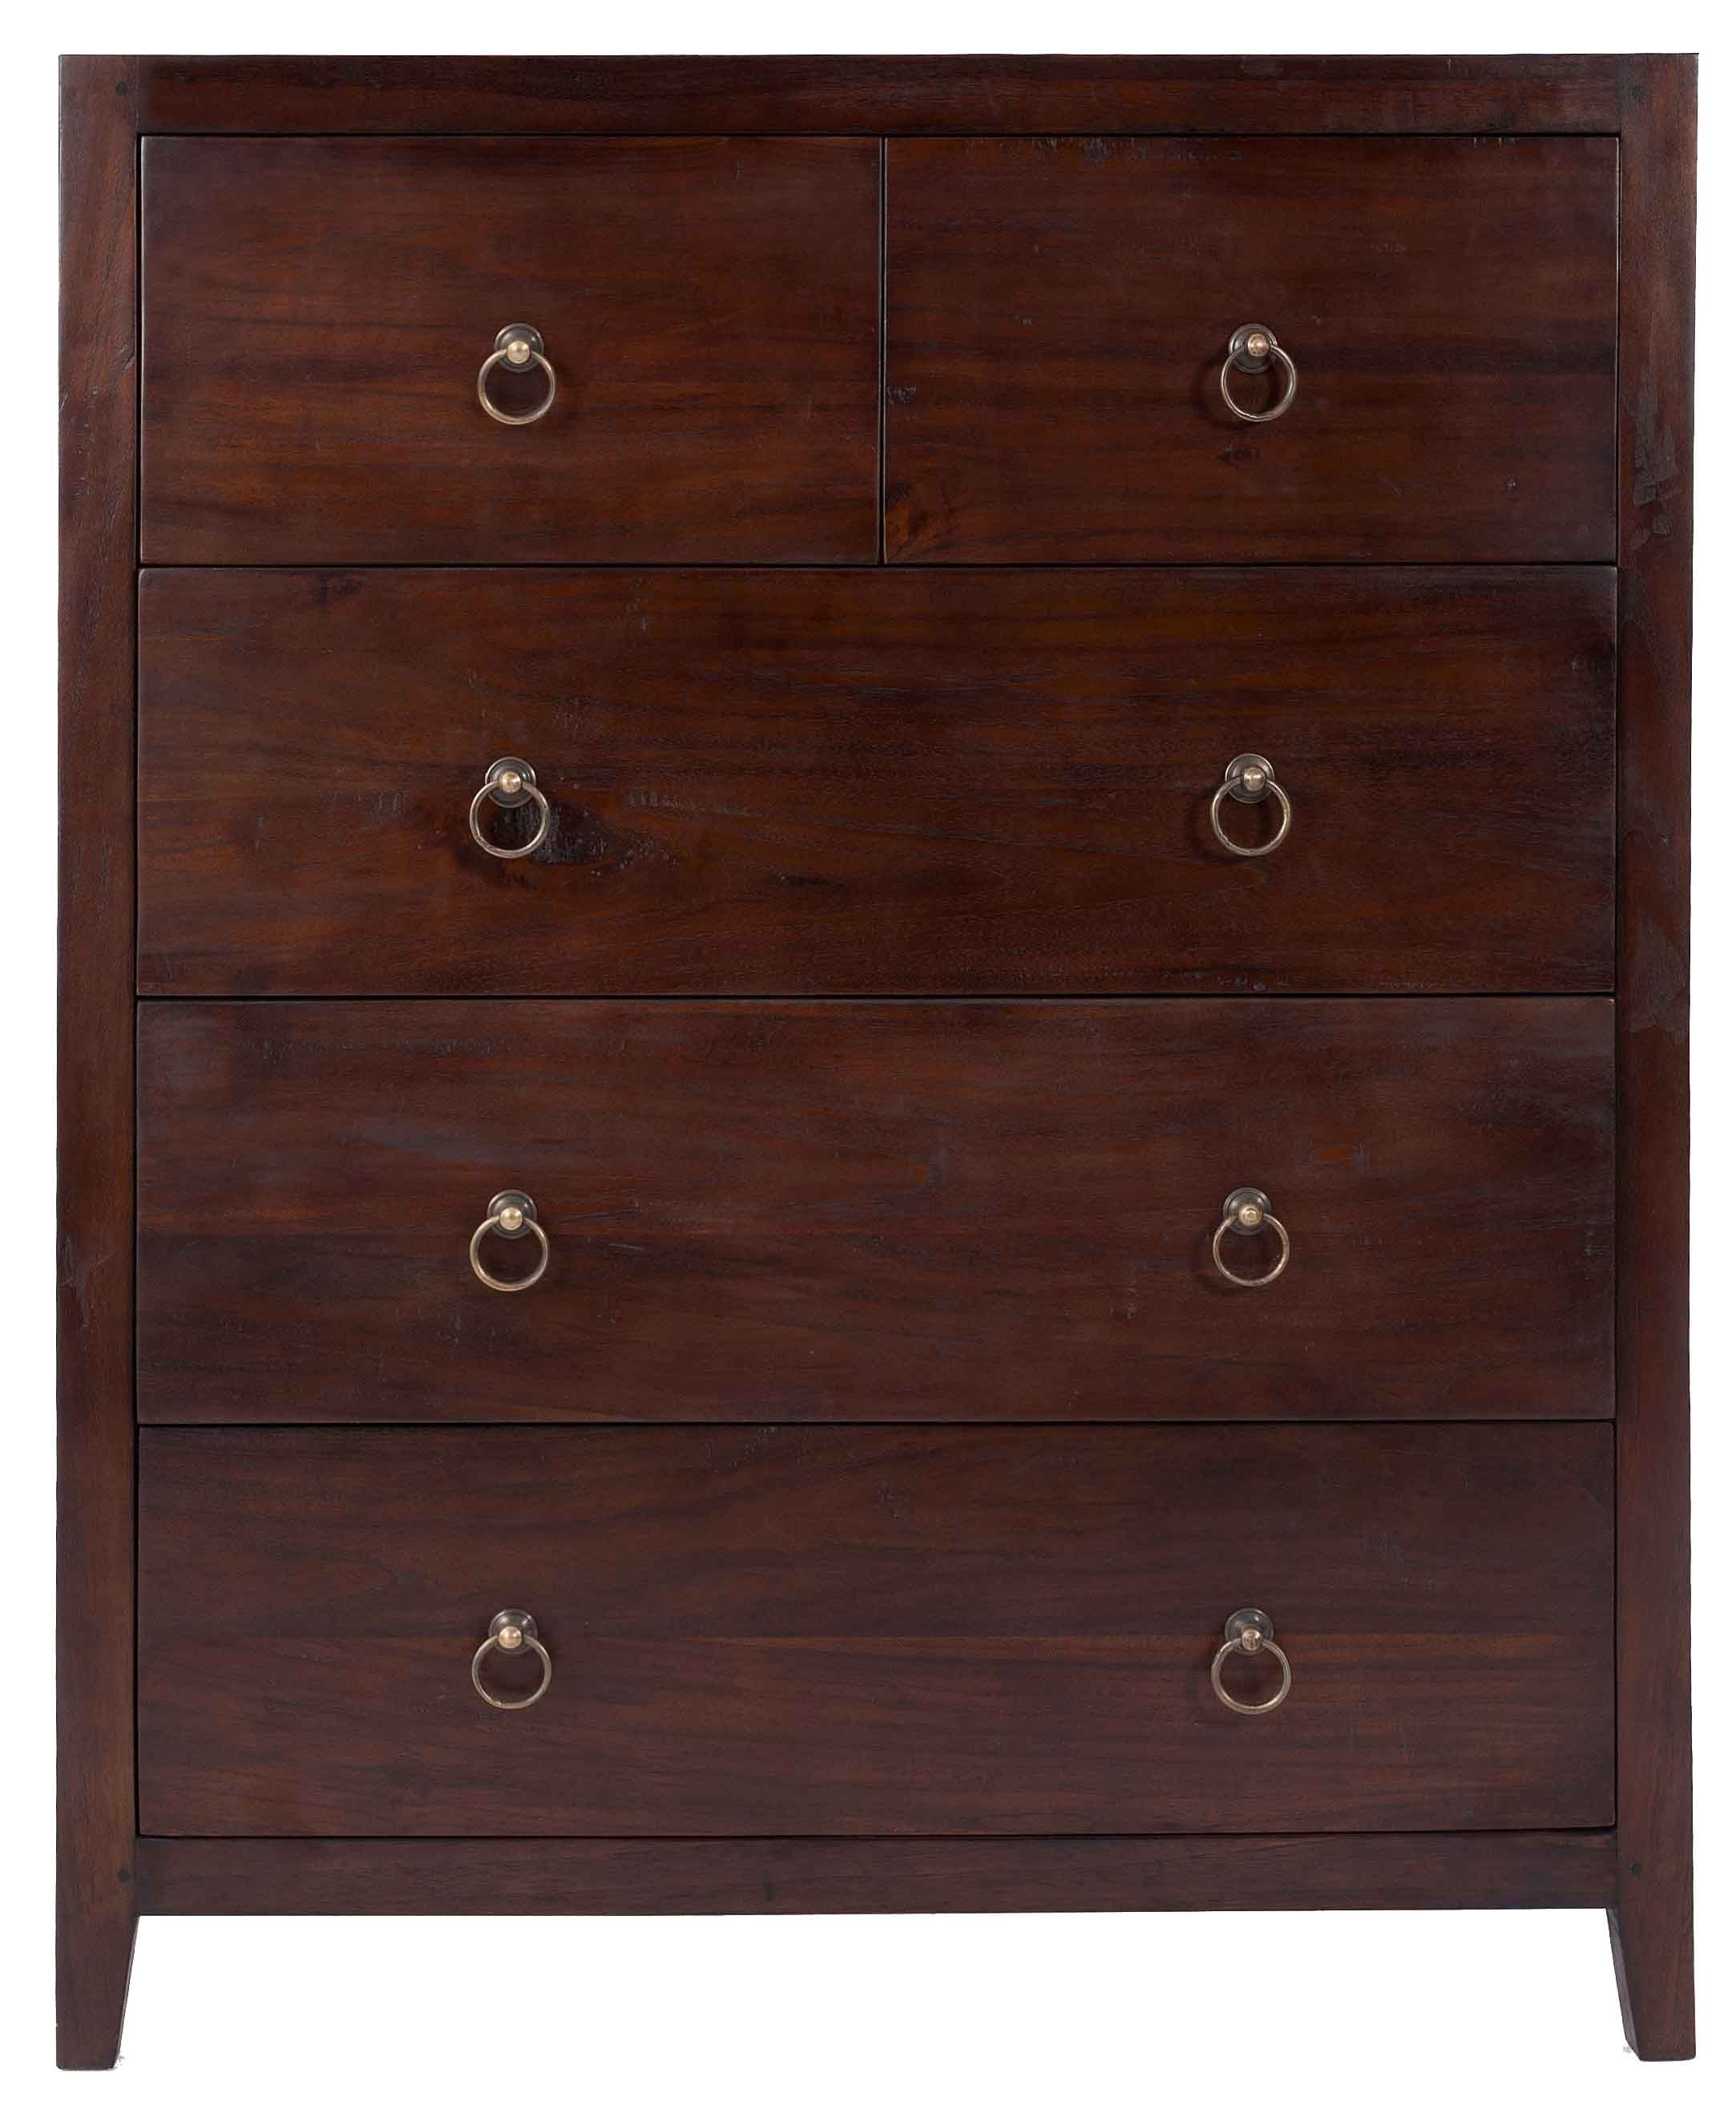 Seba Five Drawer Chestlombok In Chests Of Drawers For Recent Mandara 3 Drawer 2 Door Sideboards (View 9 of 20)